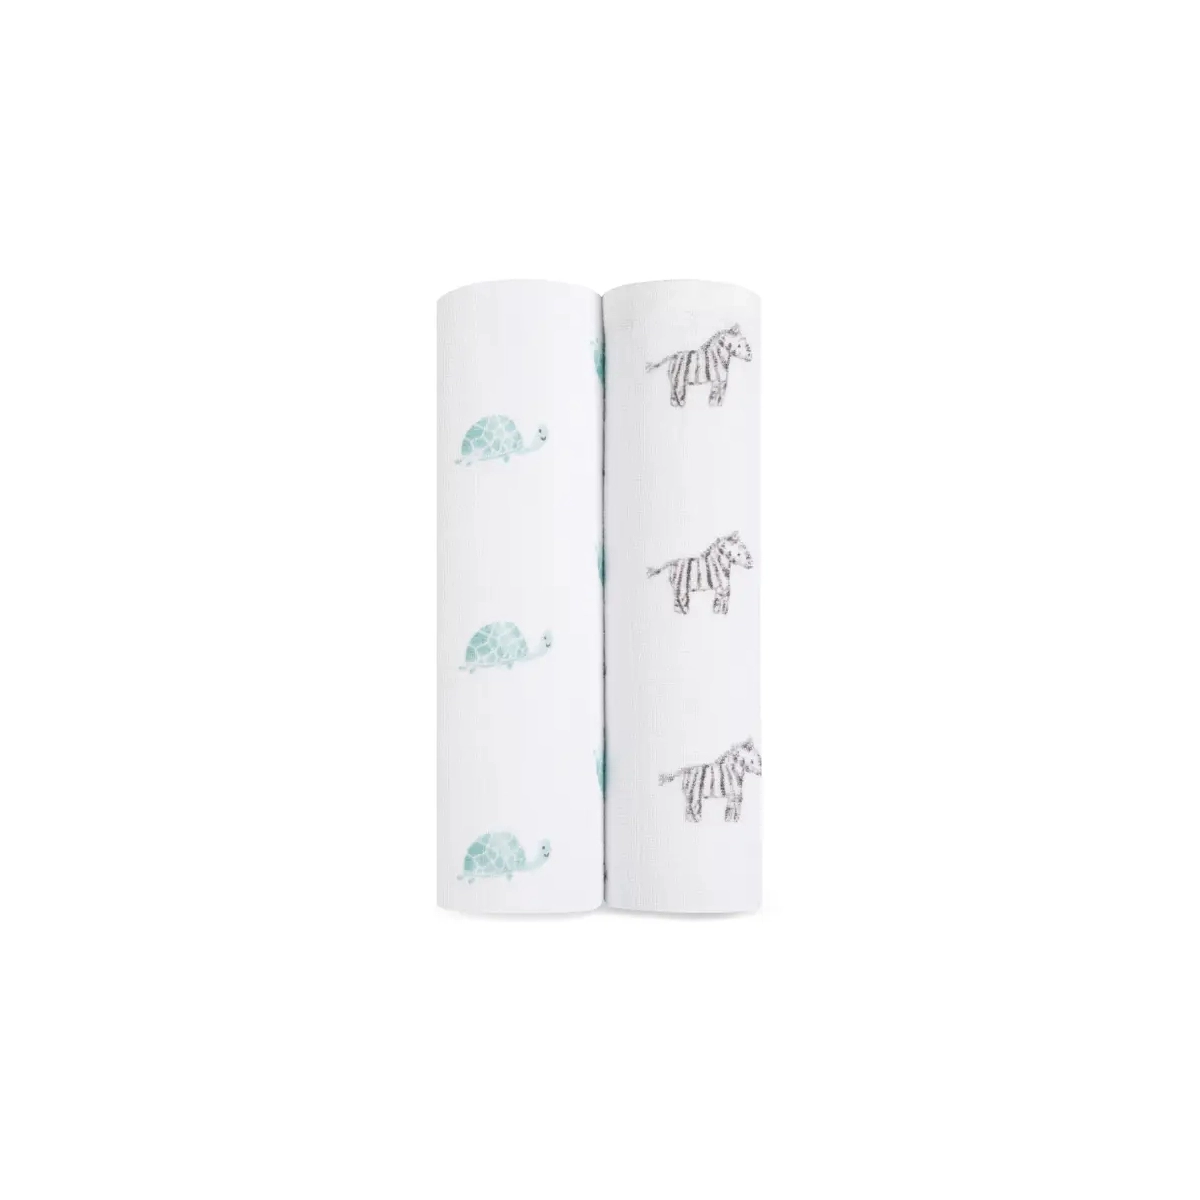 Image of Aden + Anais Pack of 2 Large Swaddle Organic Cotton Muslin - Animal Kingdom (23-19-060)